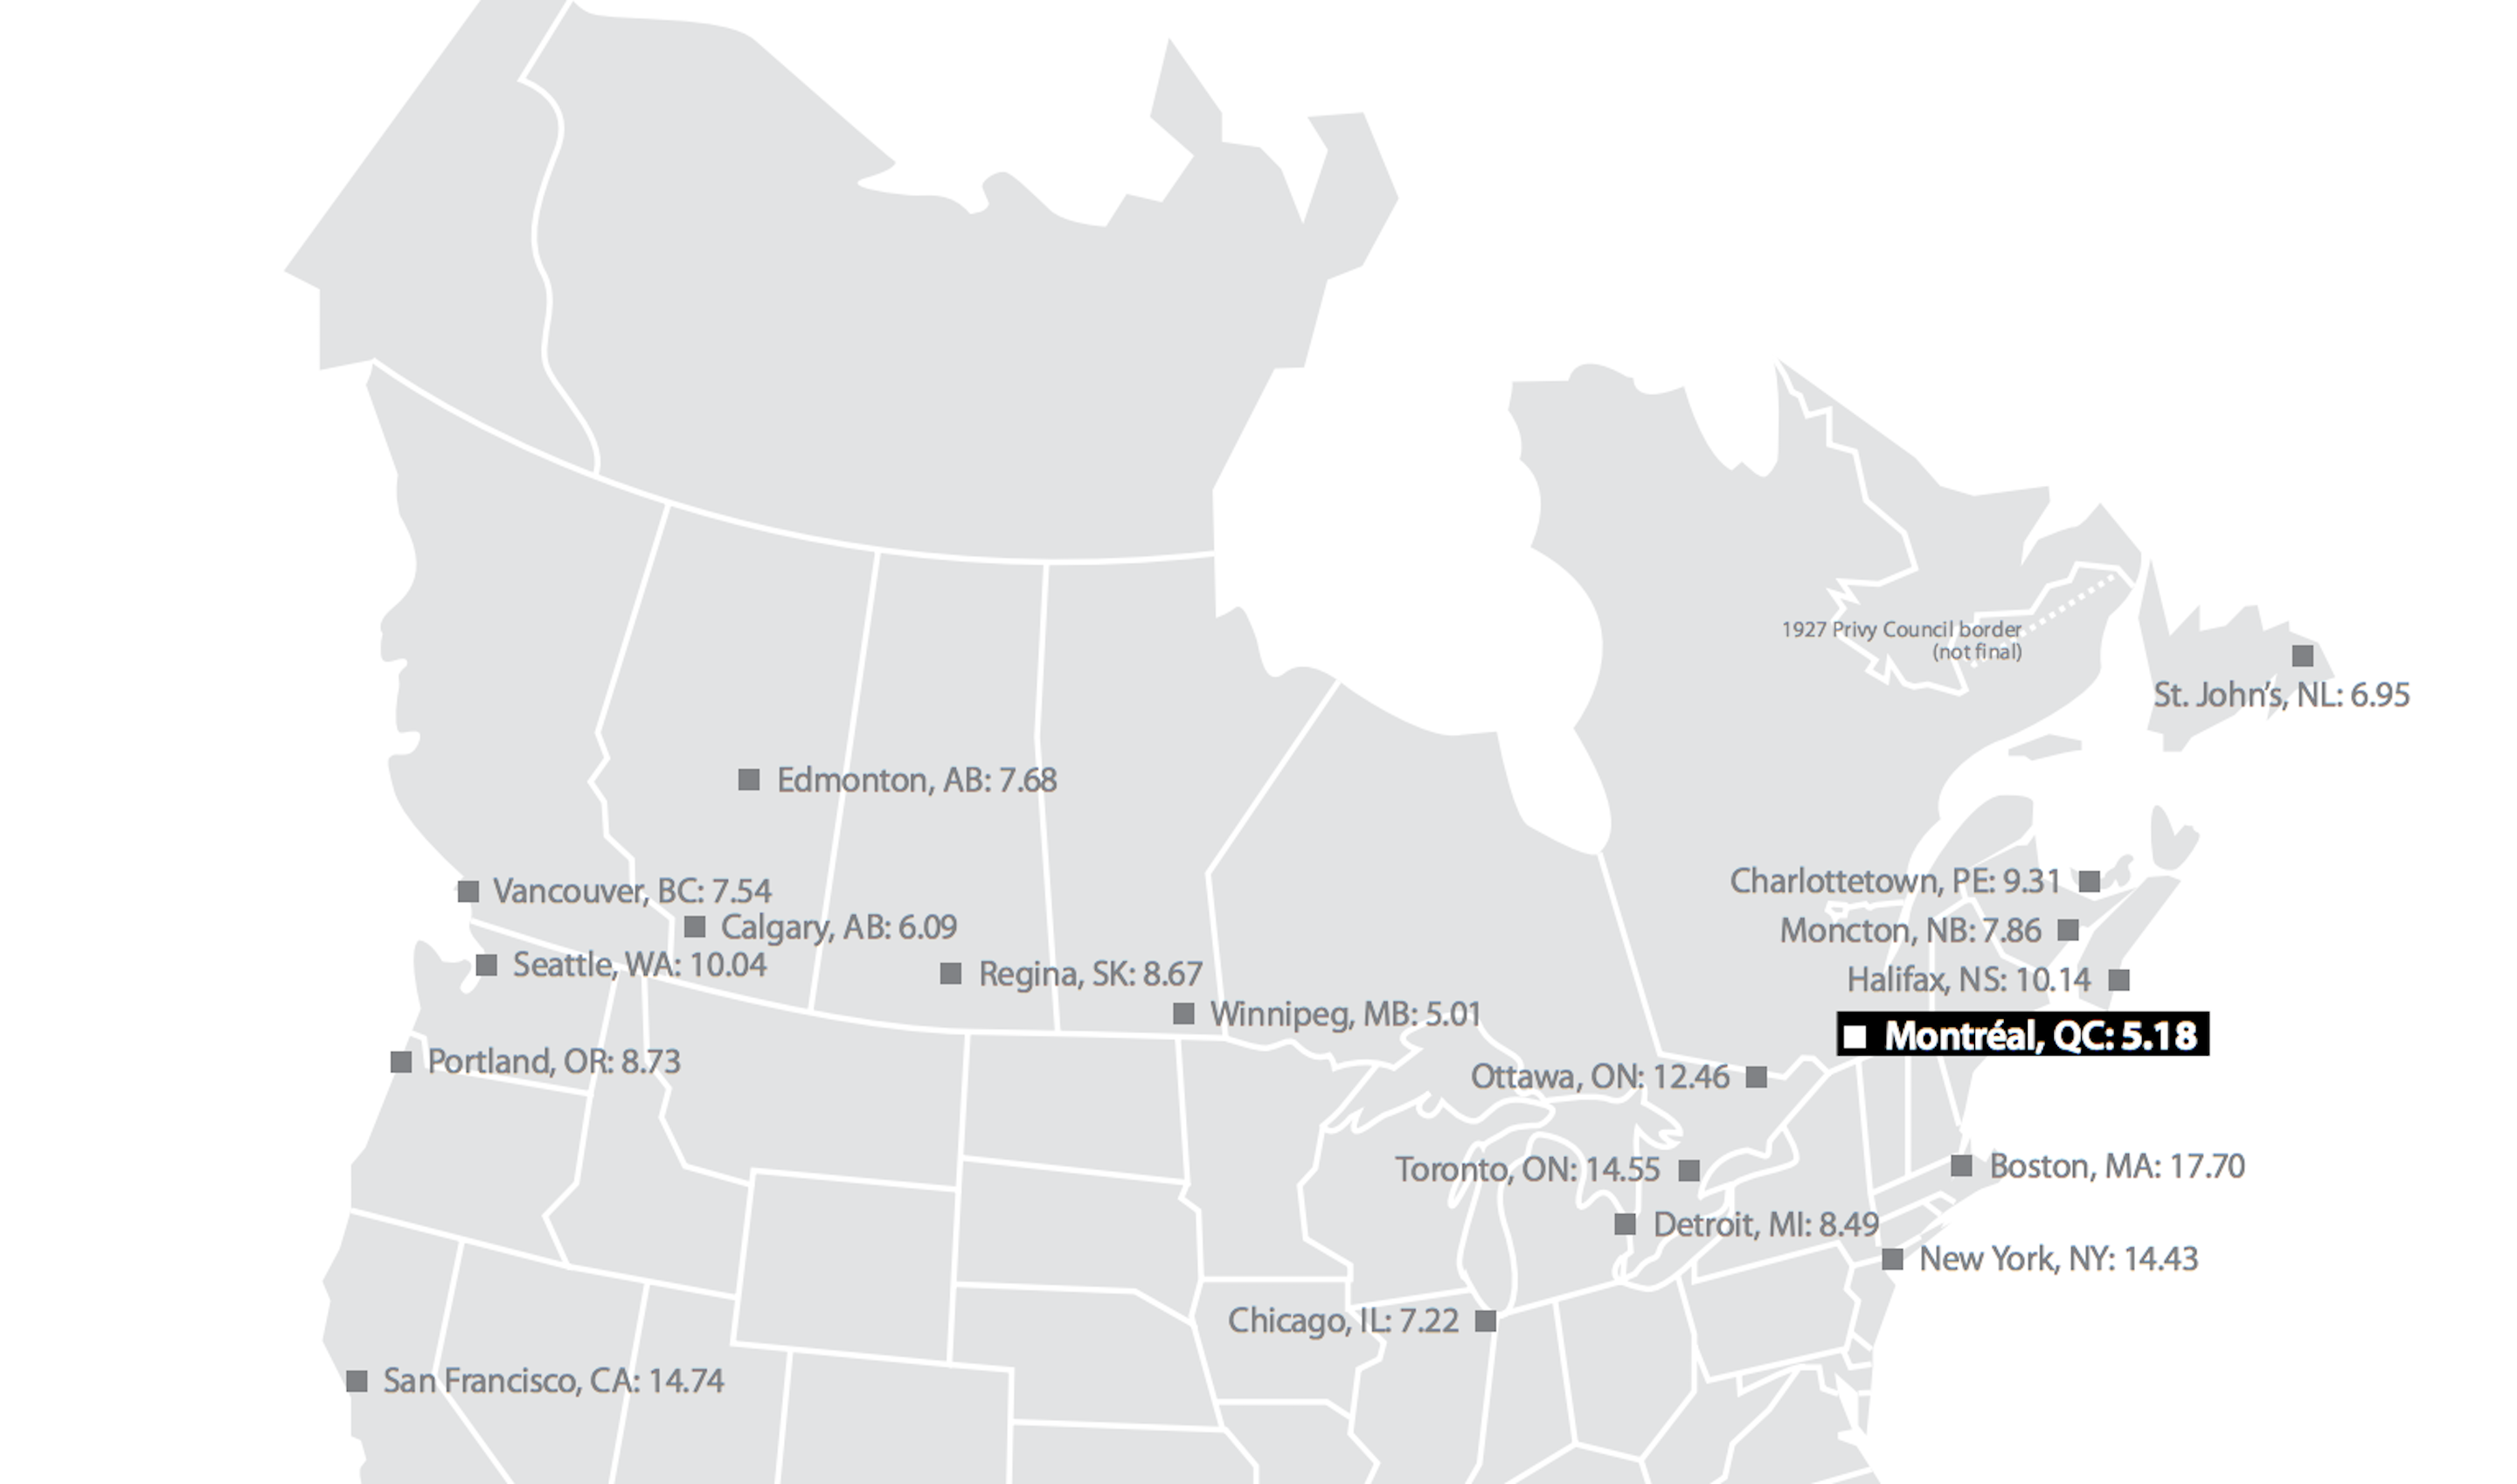 A Comparison of large-power energy prices in North America via Hydro Quebec